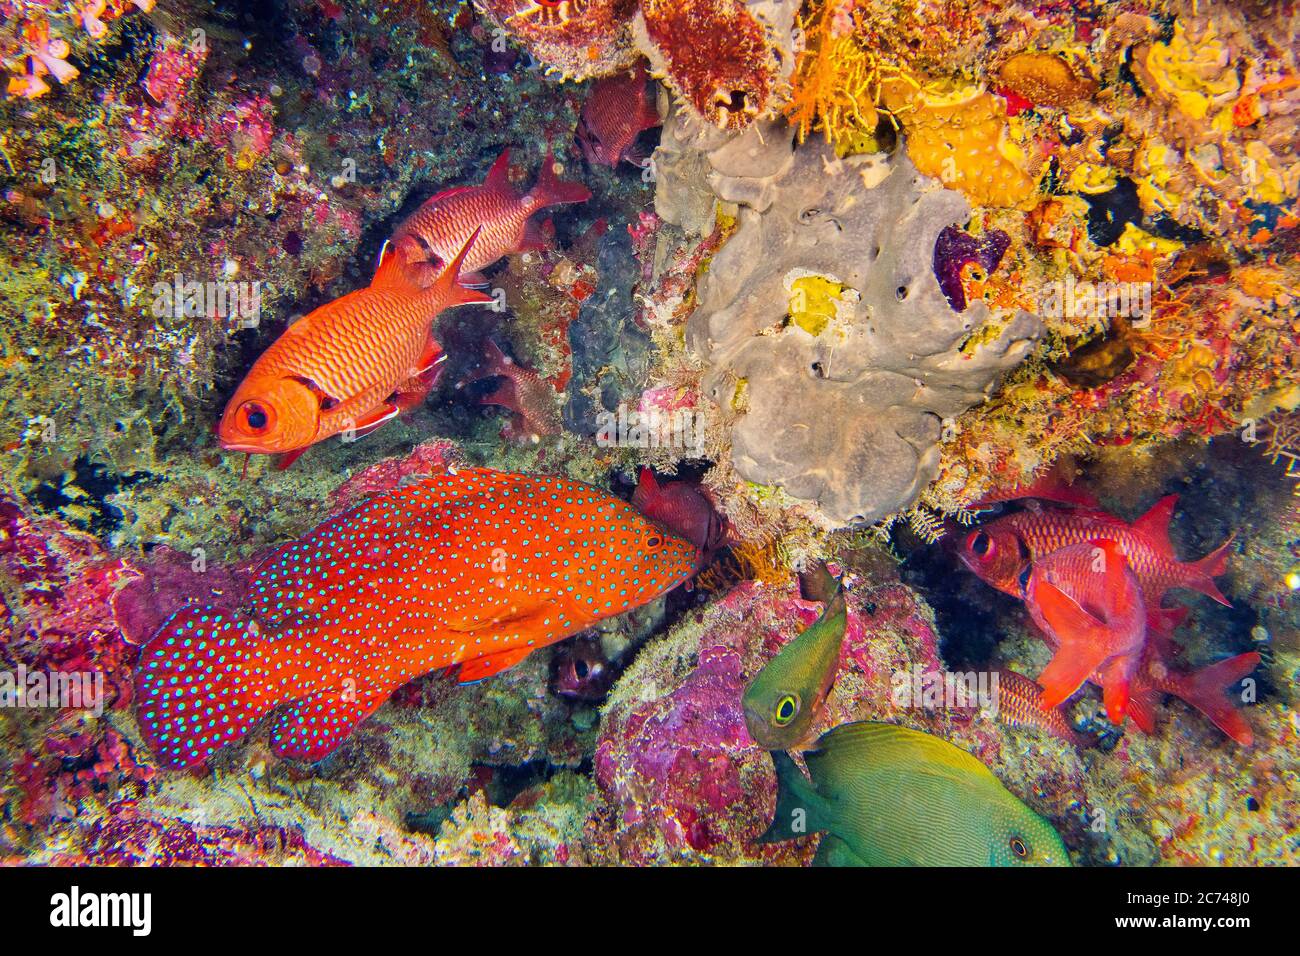 Coral Grouper, Cephalopholis miniata, Immaculate Soldierfish, Coral Reef, South Ari Atoll, Maldives, Indian Ocean, Asia Stock Photo